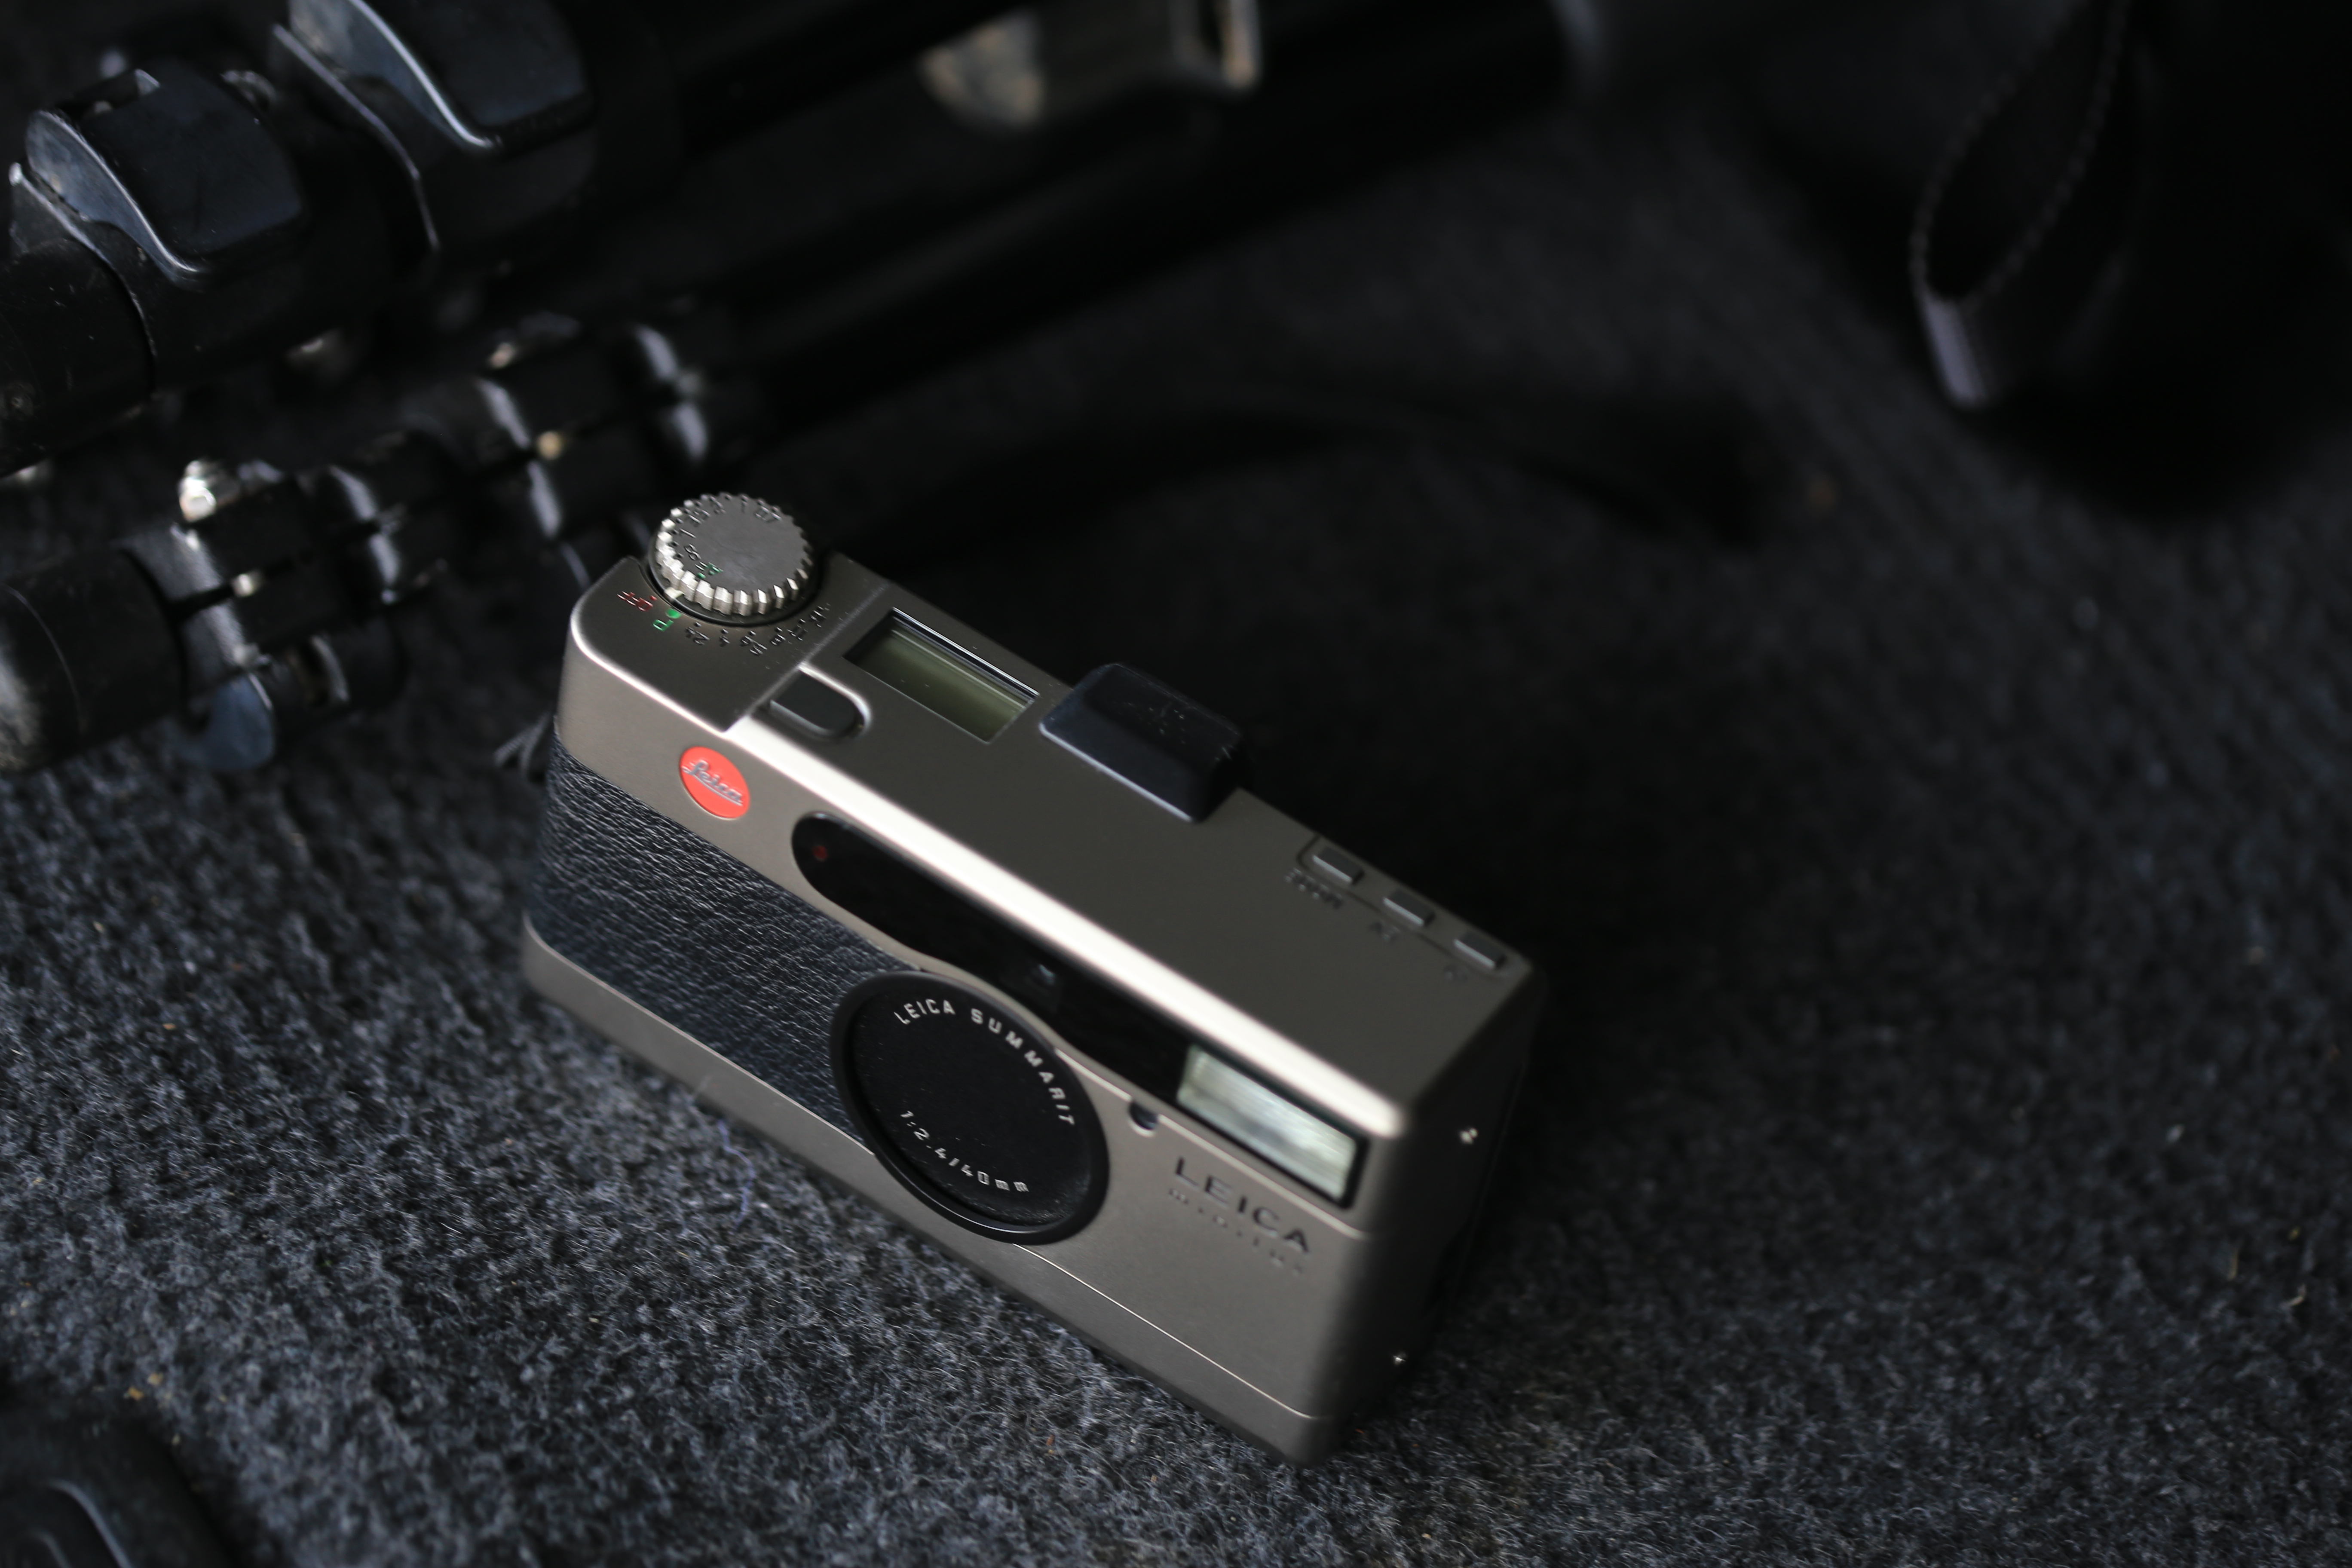 Leica Minilux: Most Up-to-Date Encyclopedia, News & Reviews